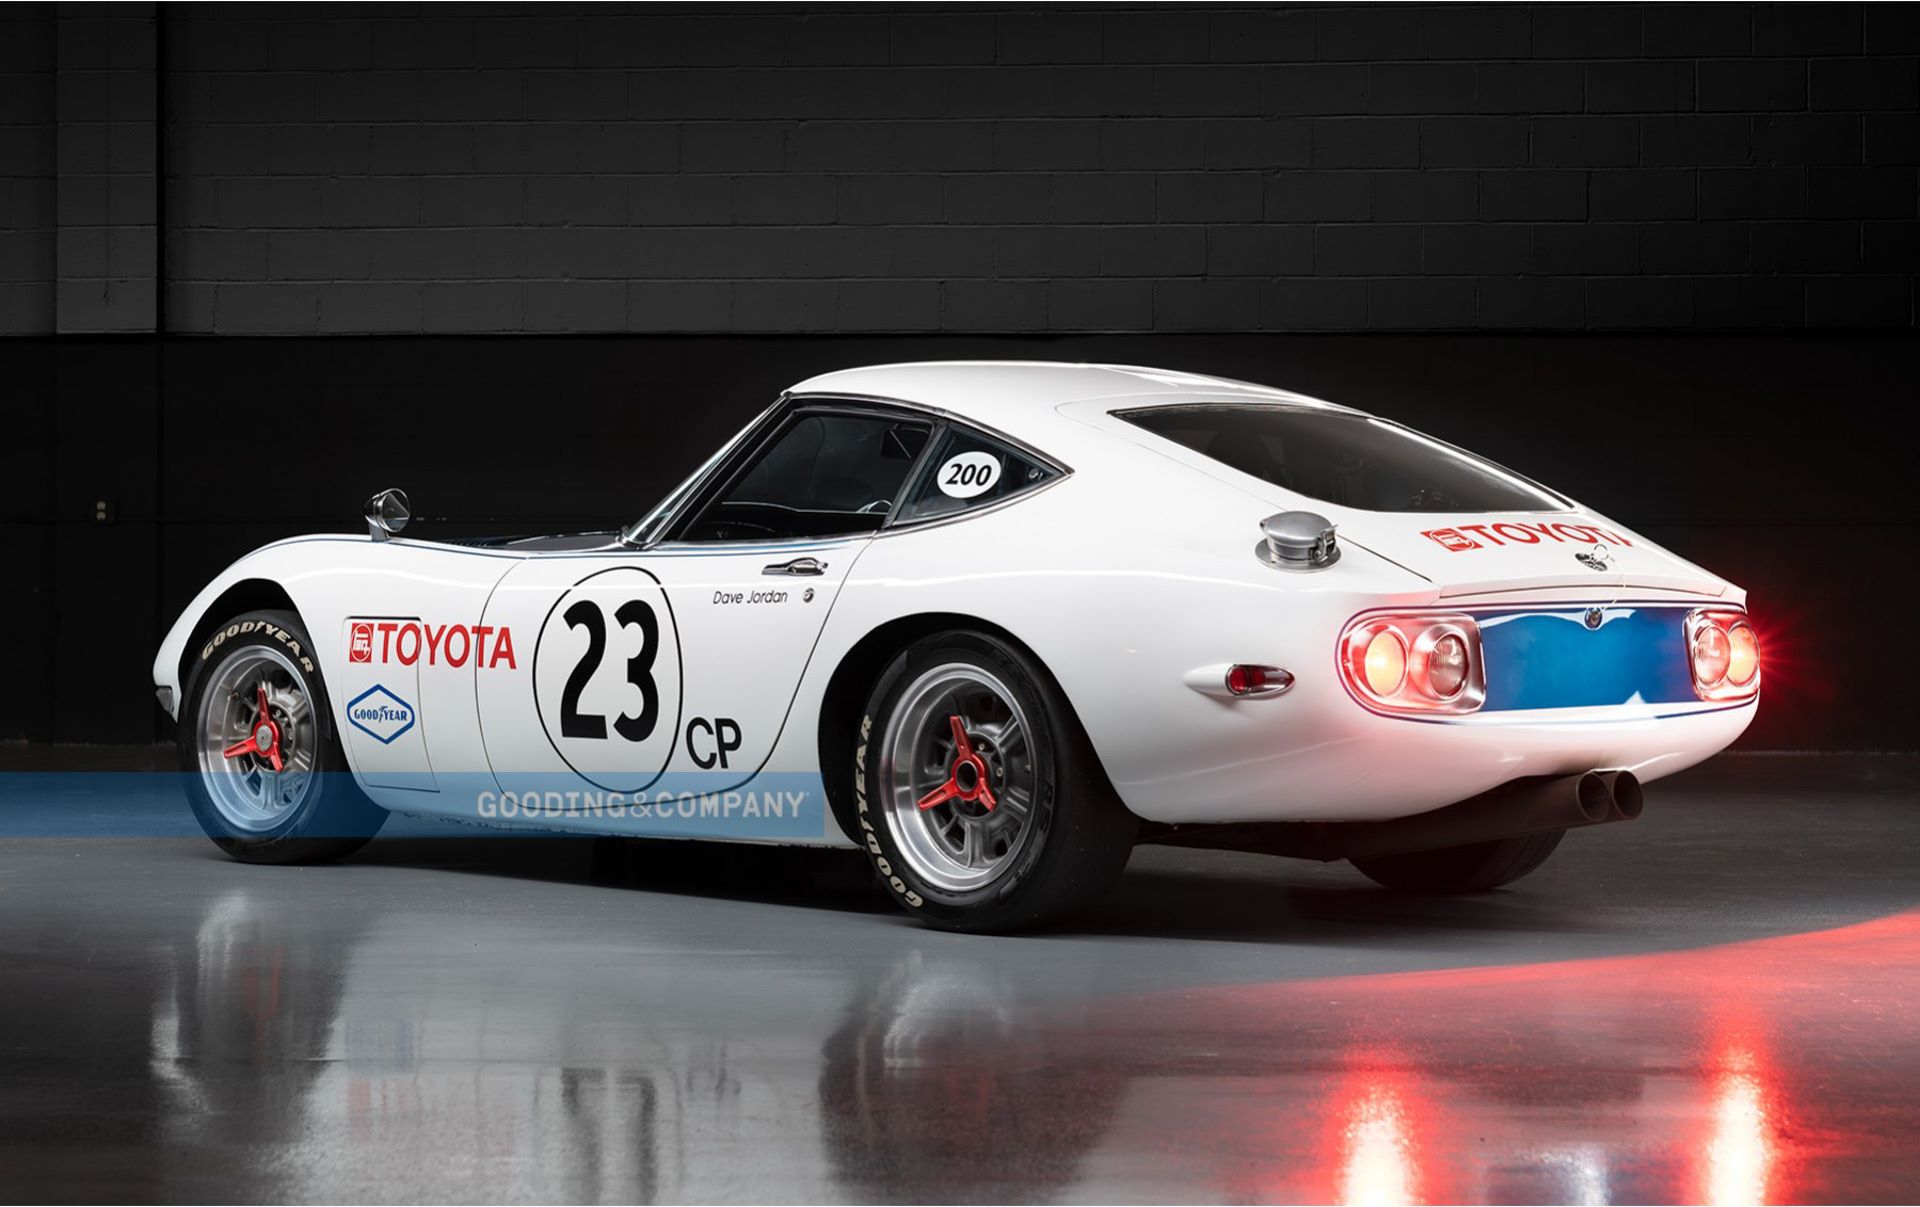 Toyota-Shelby-2000GT-3